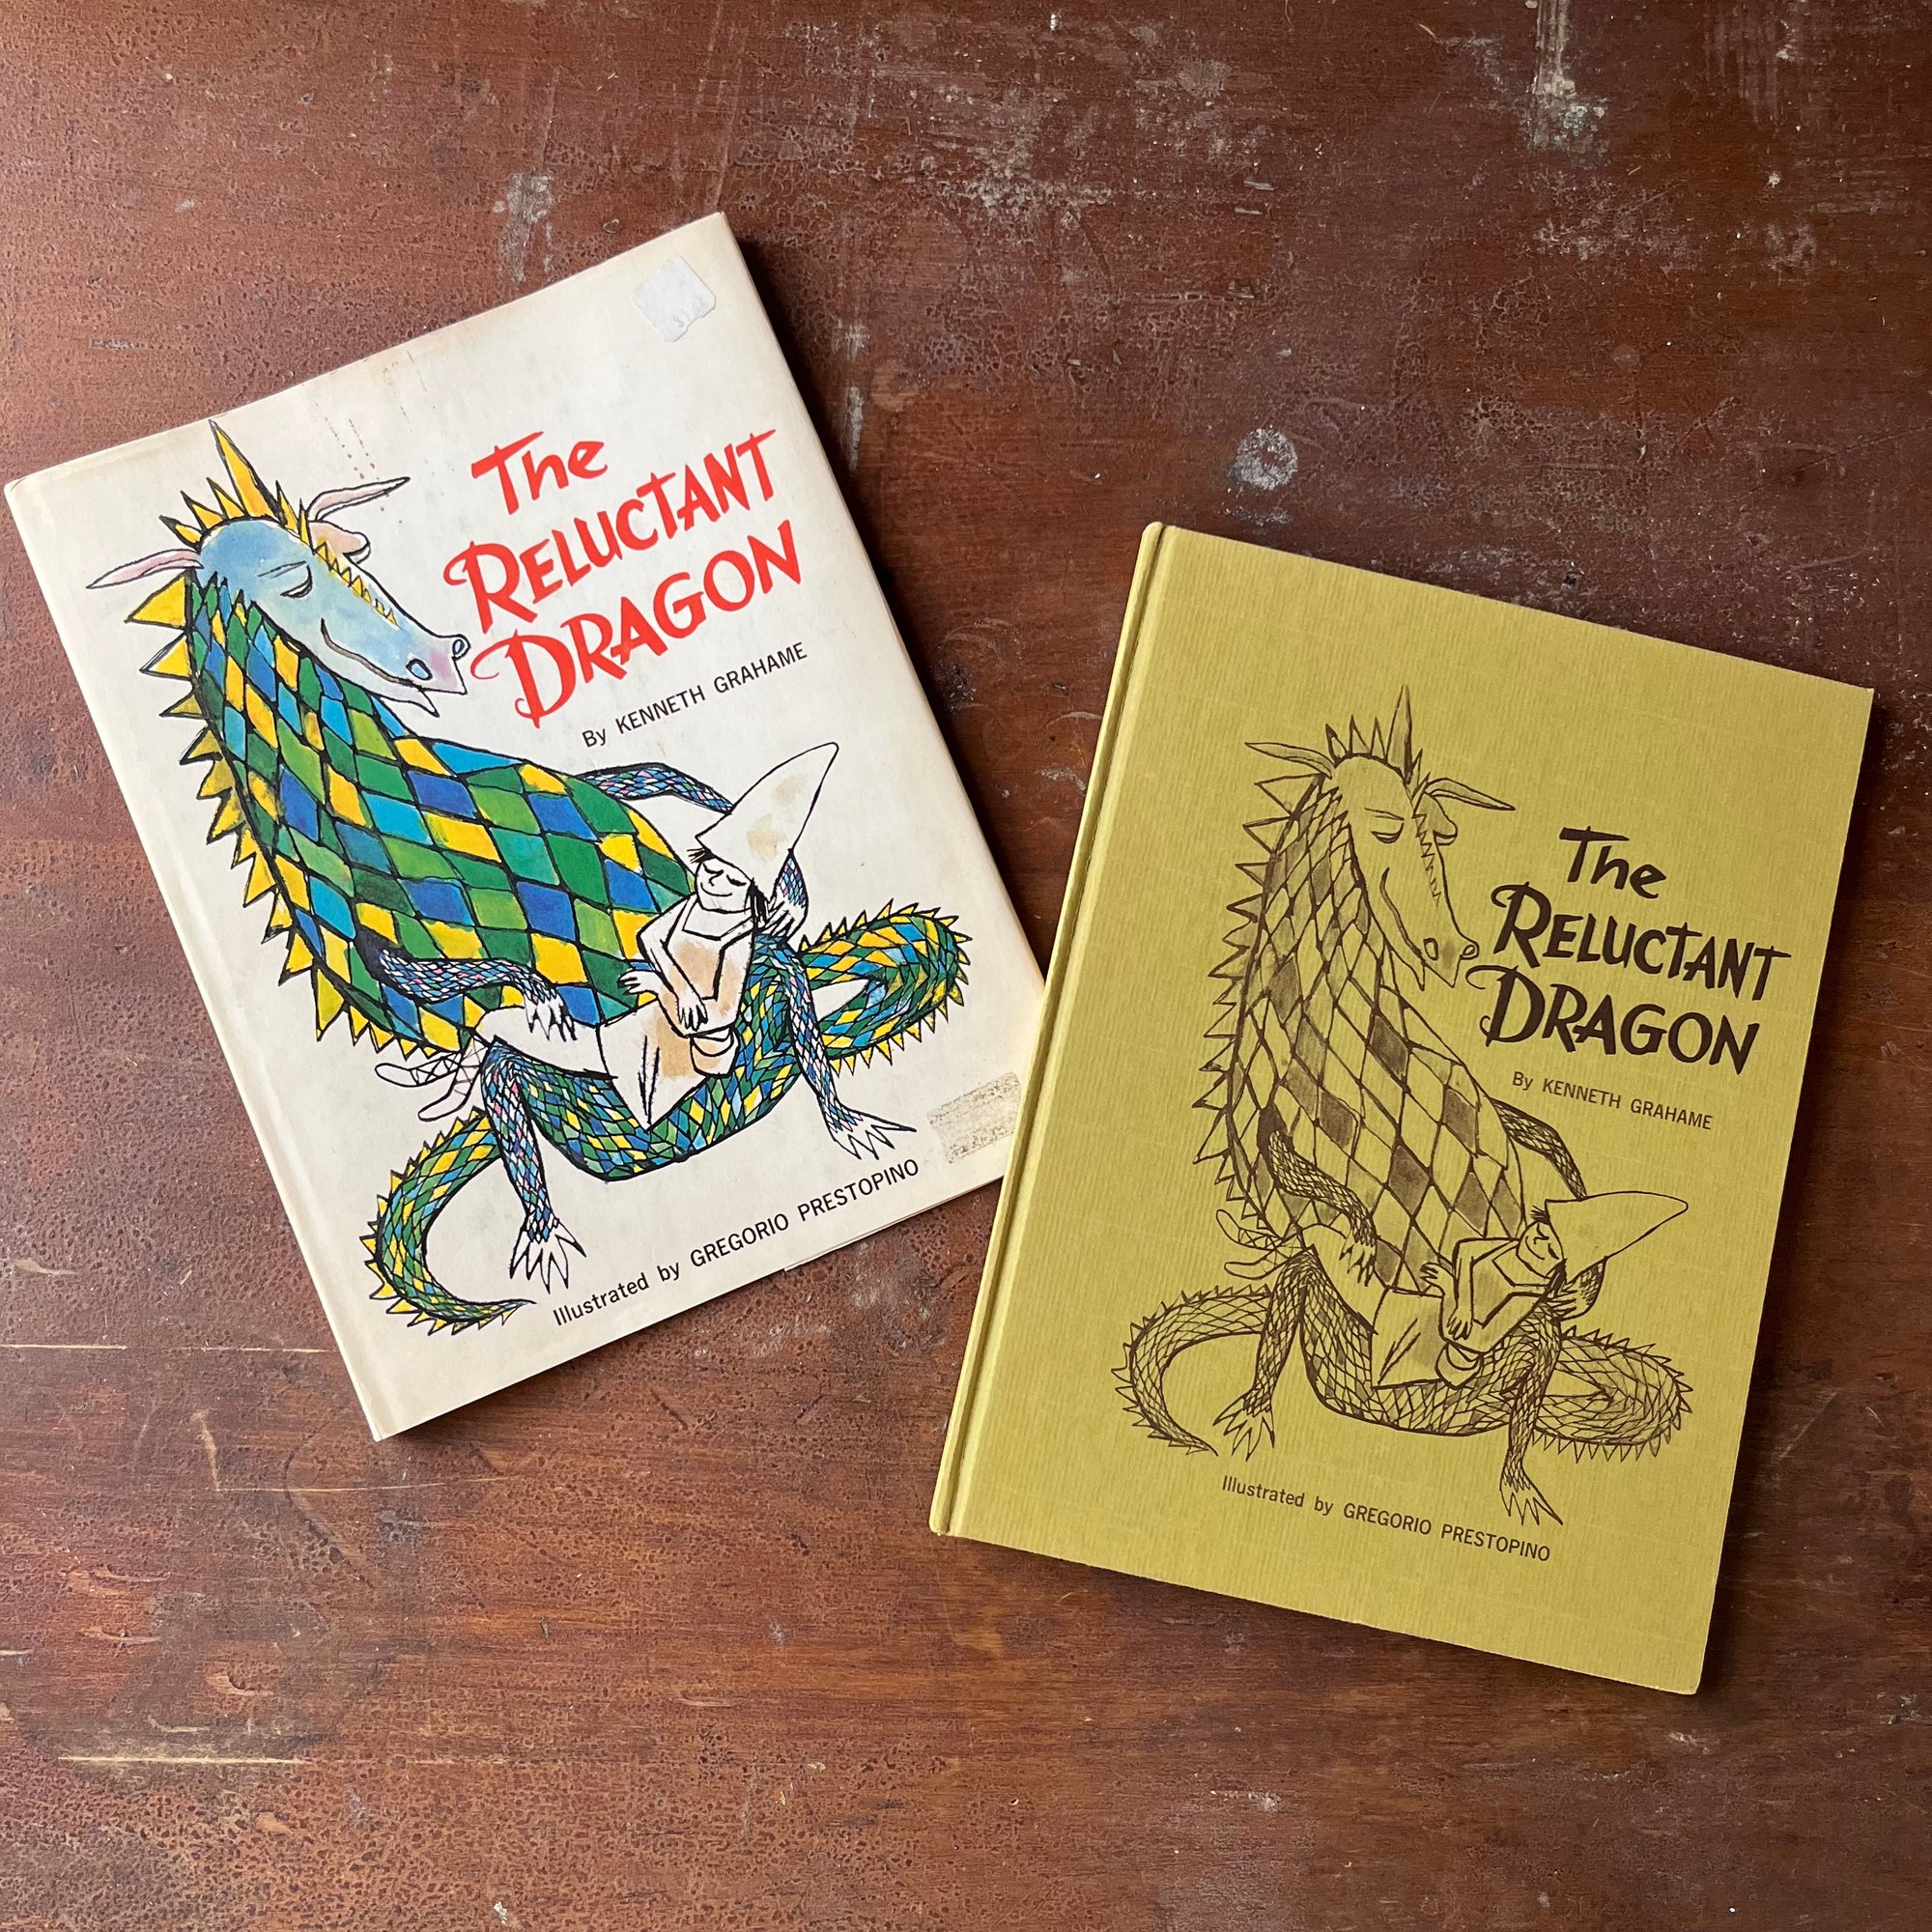 The Reluctant Dragon Written by Kenneth Grahame-Illustrations by Gregorio Prestopino-1968 children's picture book-view of the front cover & dust jacket - same image of the dragon & the boy on both